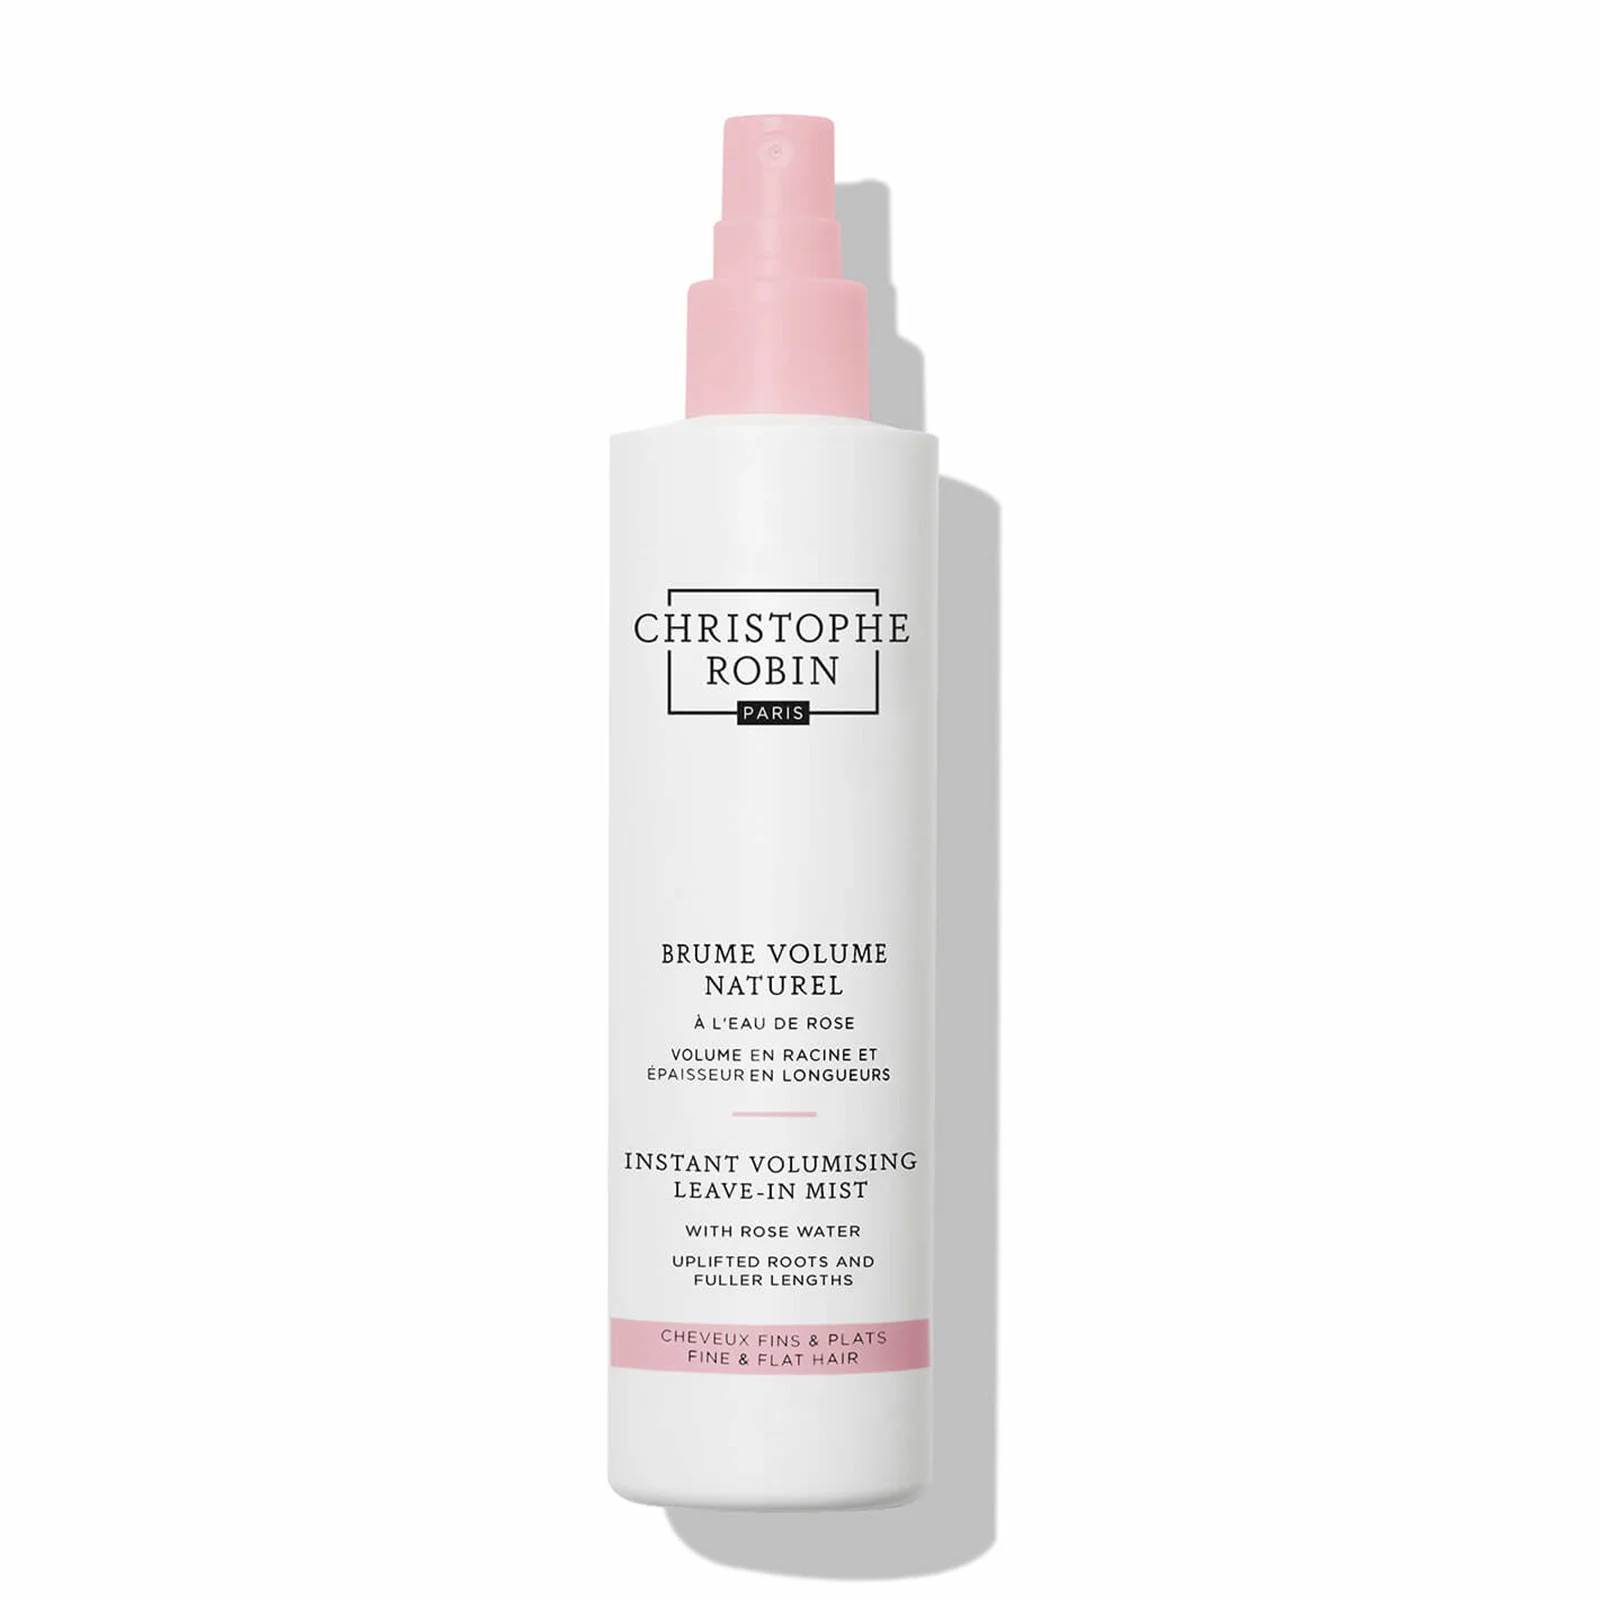 Christophe Robin Instant Volumising Leave-In Mist with Rose Extract 150ml Image 1